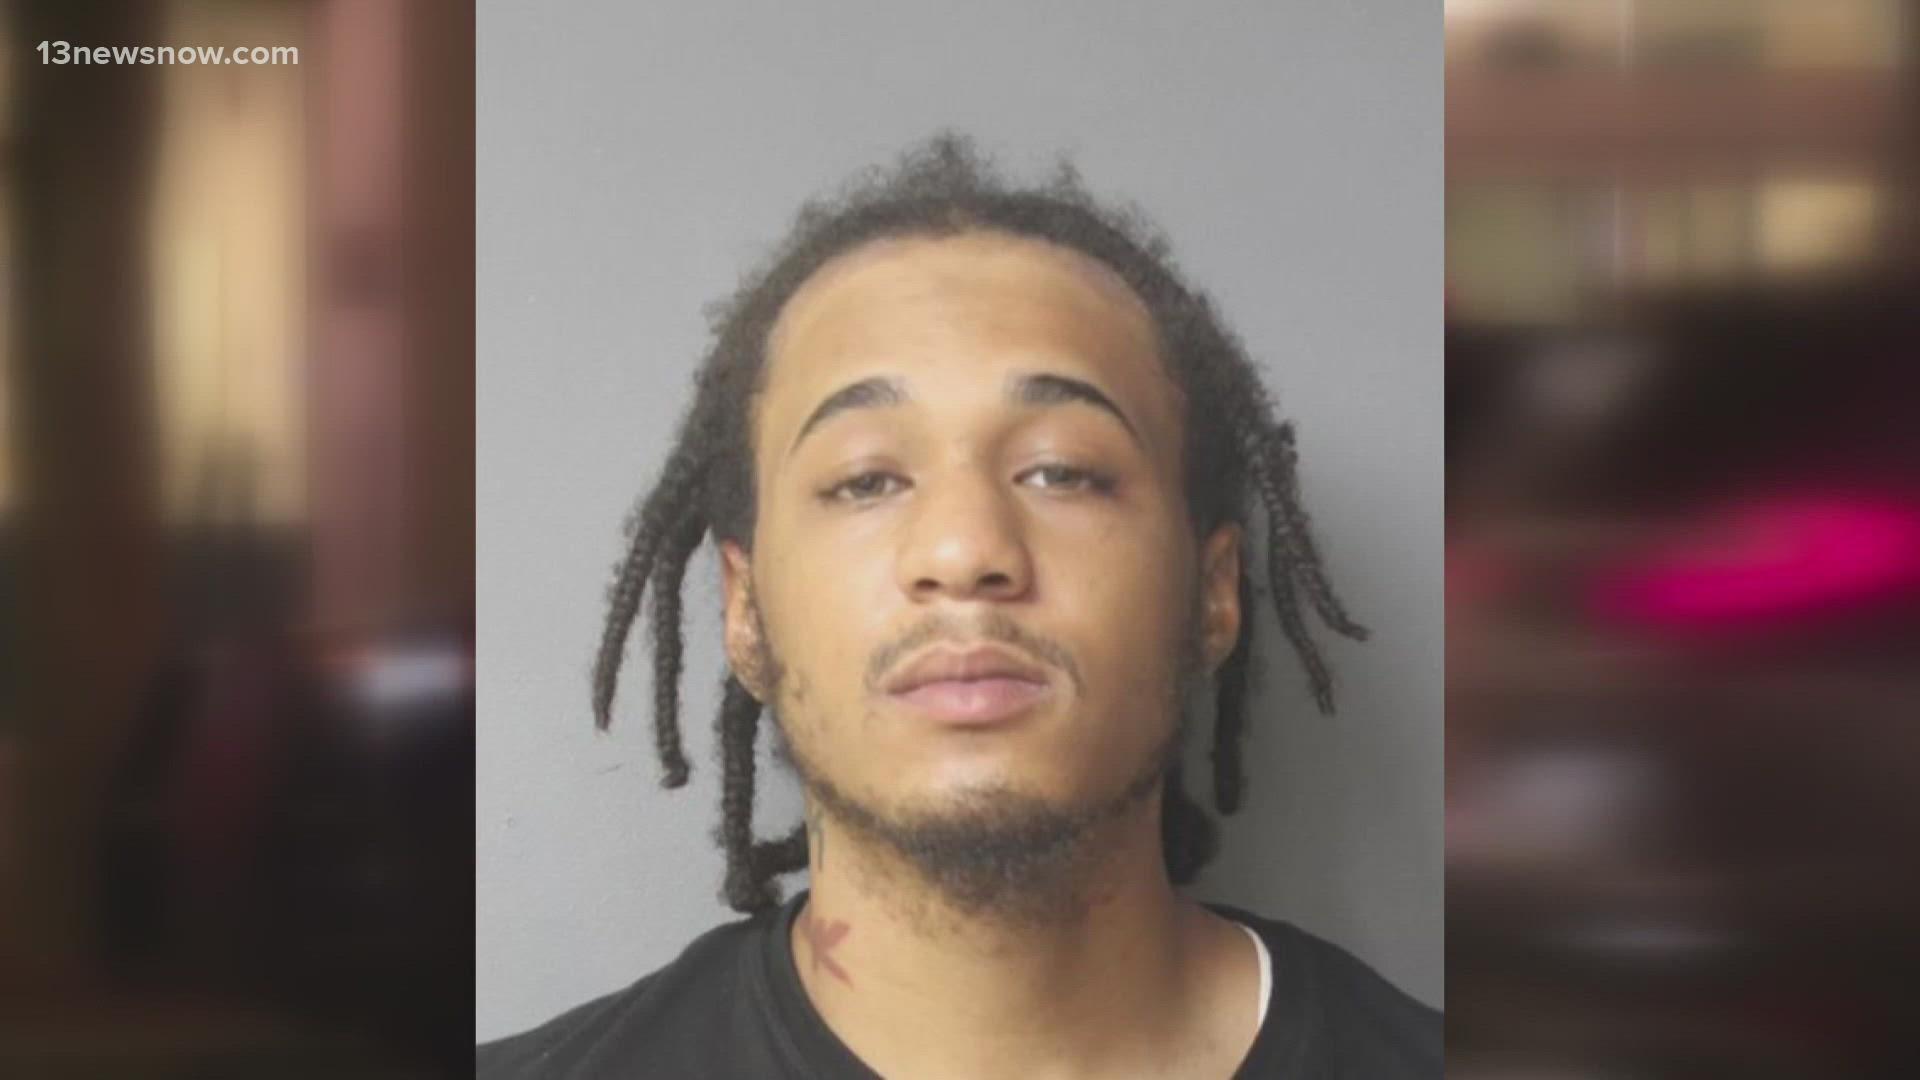 A suspect is behind bars, nearly two months after a night of gun violence and chaos on Granby Street in Norfolk claimed three lives and left two other people hurt.